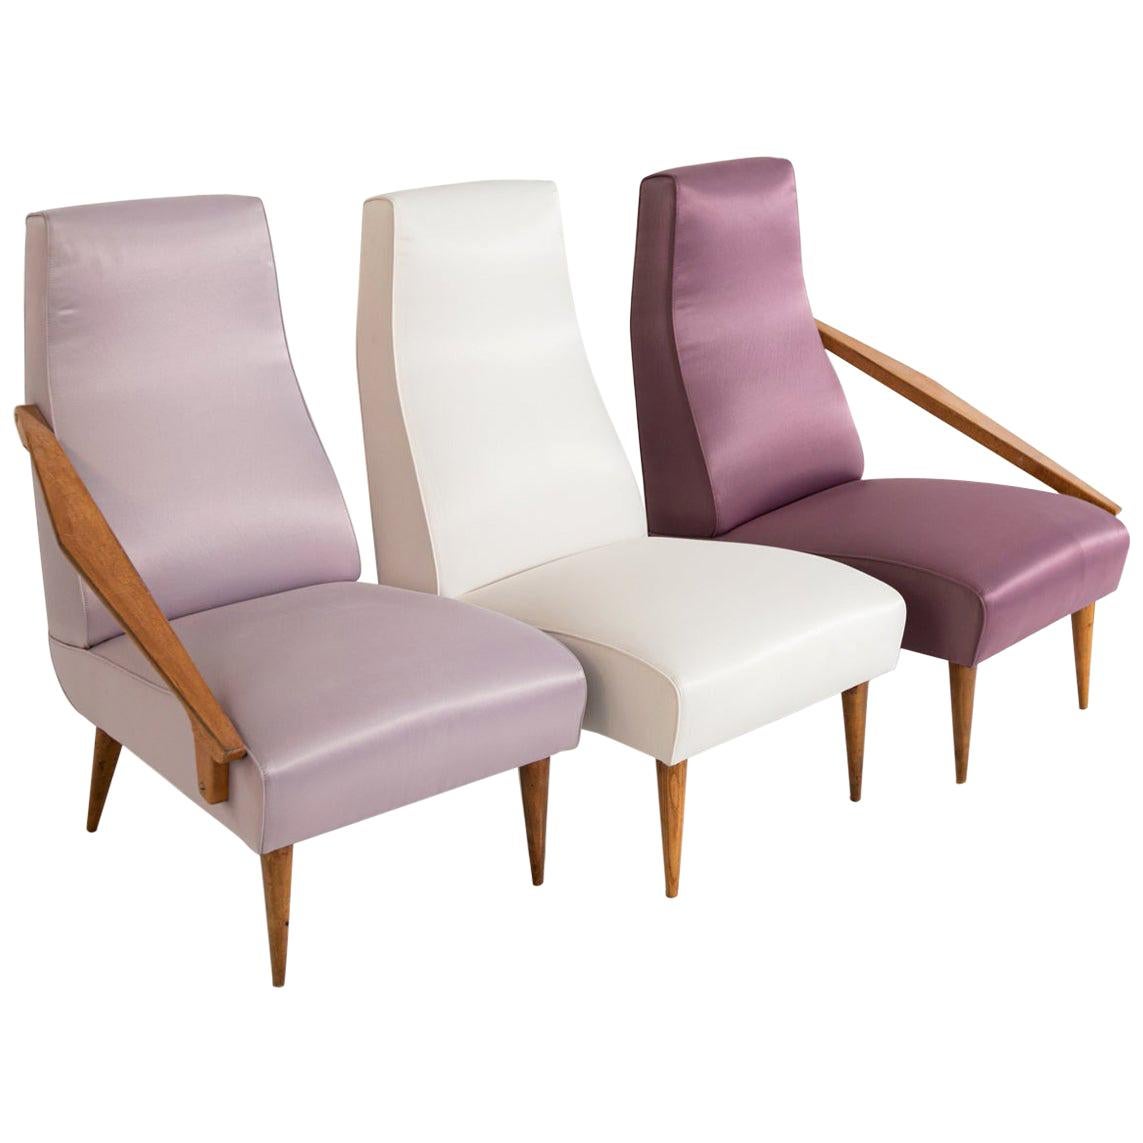 Gio Ponti Attributed and Fils Edition Set of Three Armchairs, circa 1955